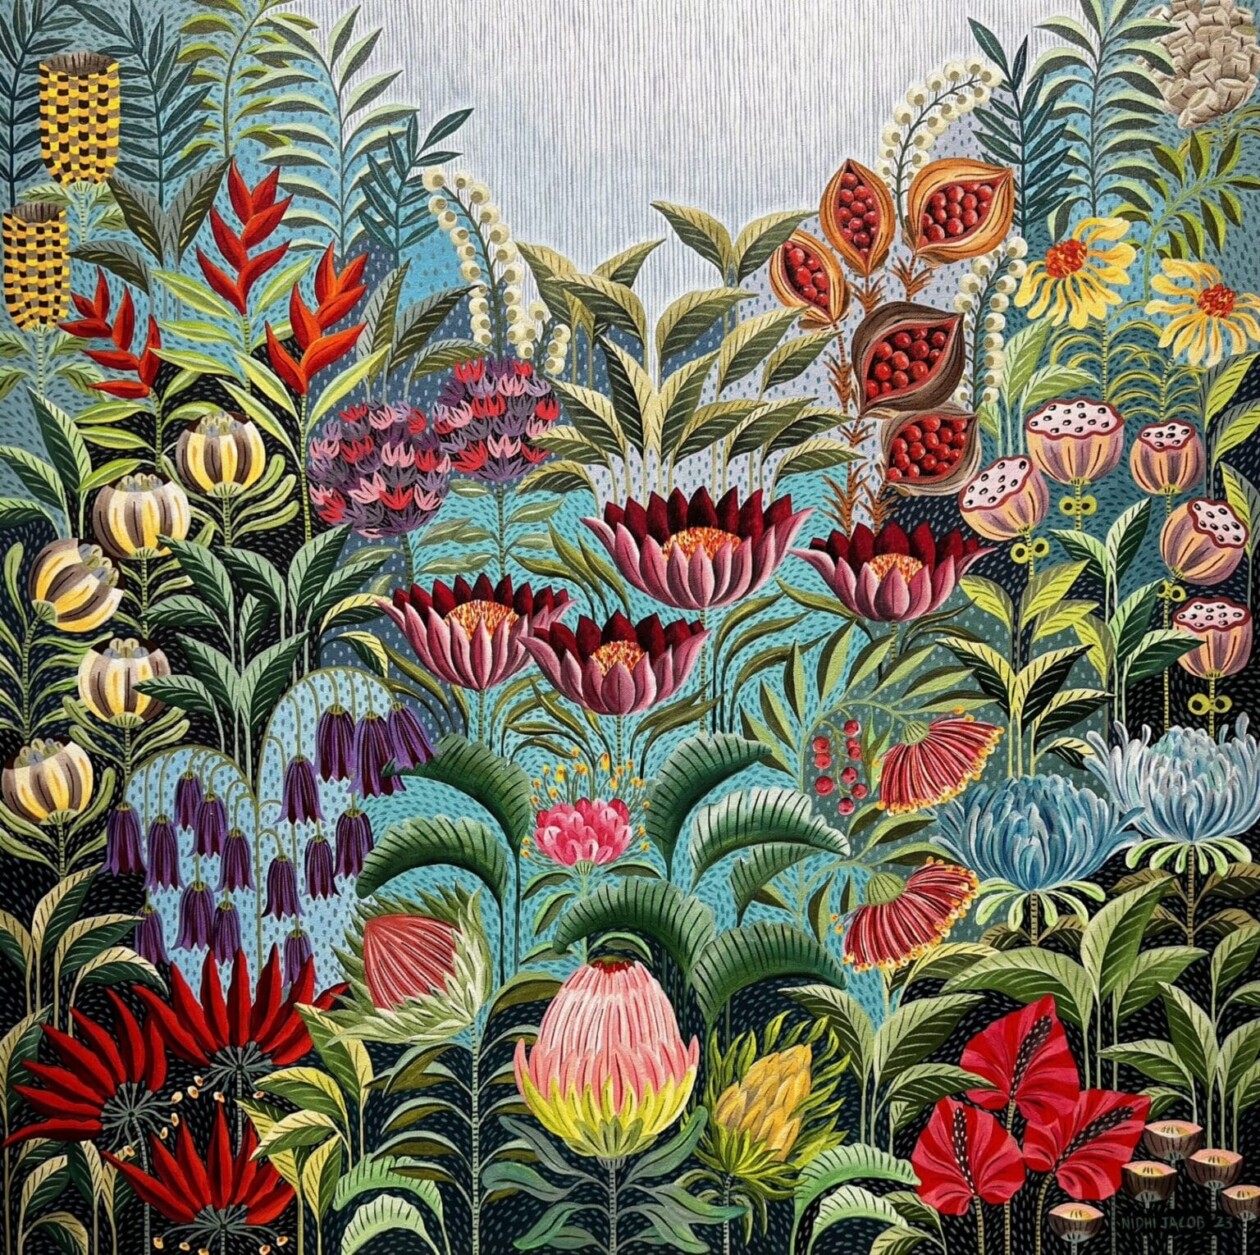 Intricate And Detailed Fantasy Garden Paintings By Nidhi Mariam Jacob (3)